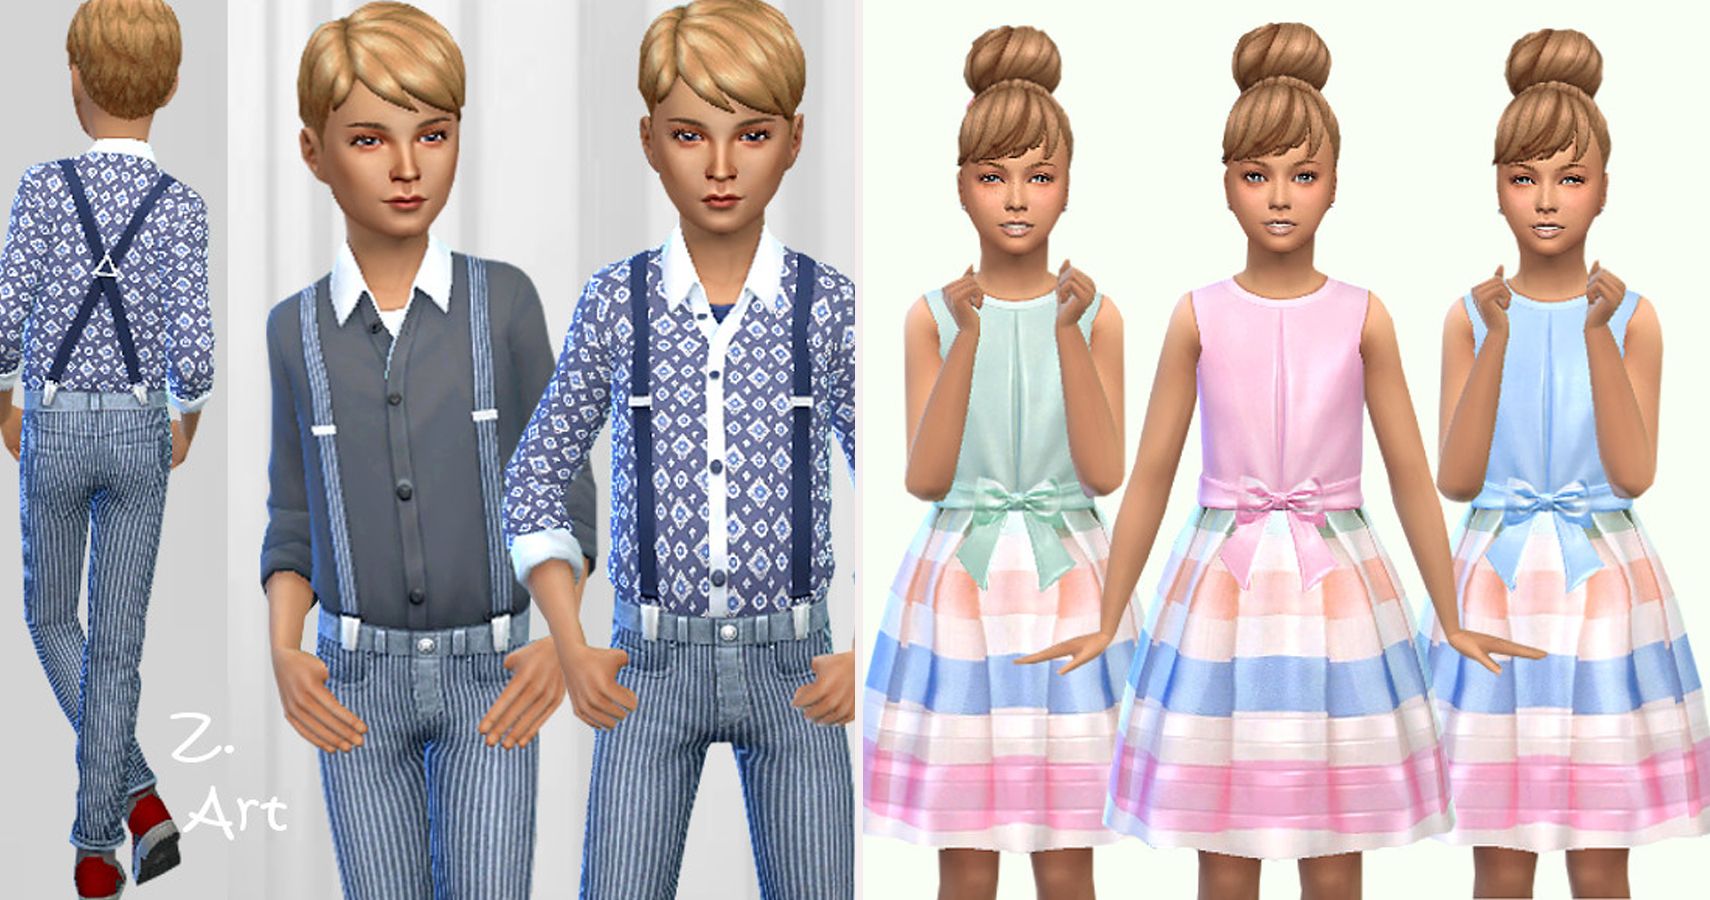 Left side 3 male sim children in colored t-shirts and suspenders. Right side 3 female children sims in pastel dresses.